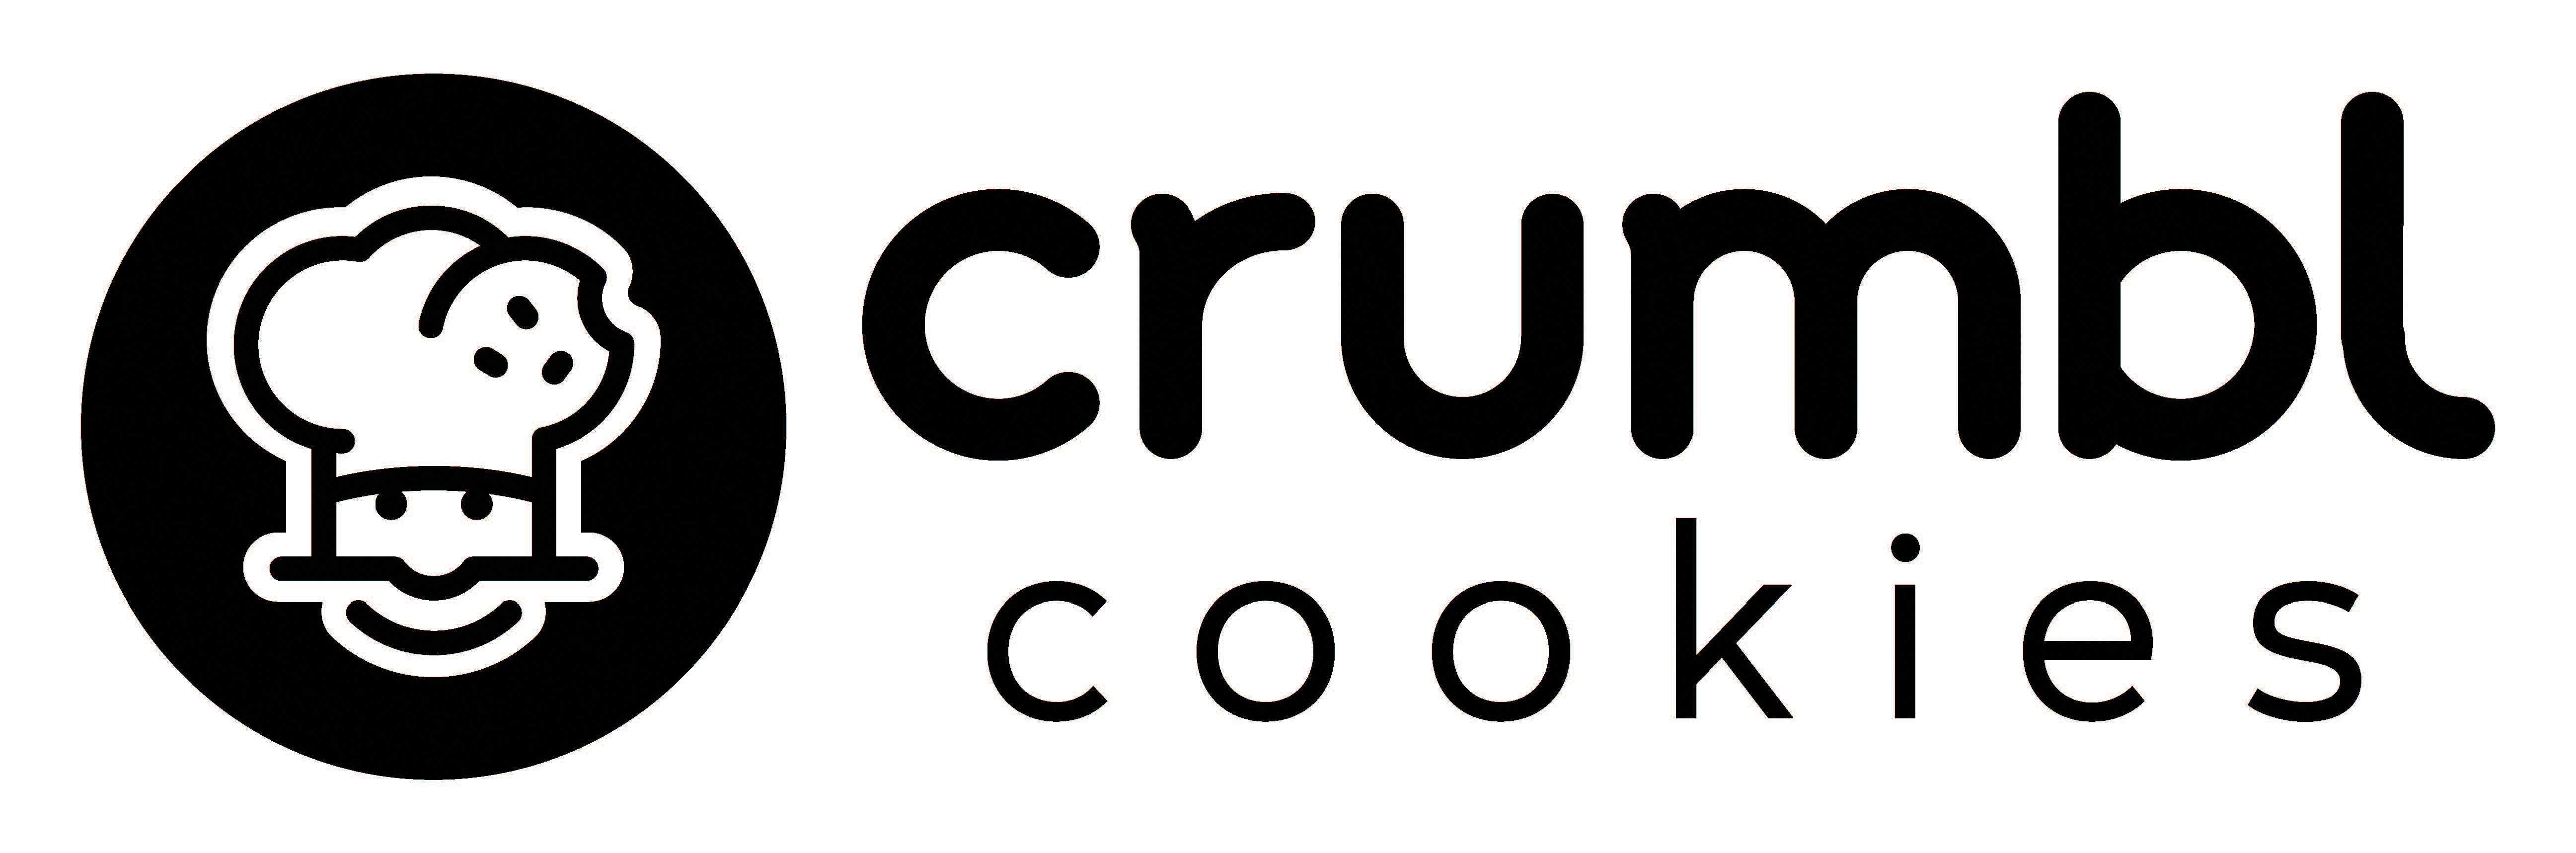 Cookies Logo Graphic by anharismail · Creative Fabrica